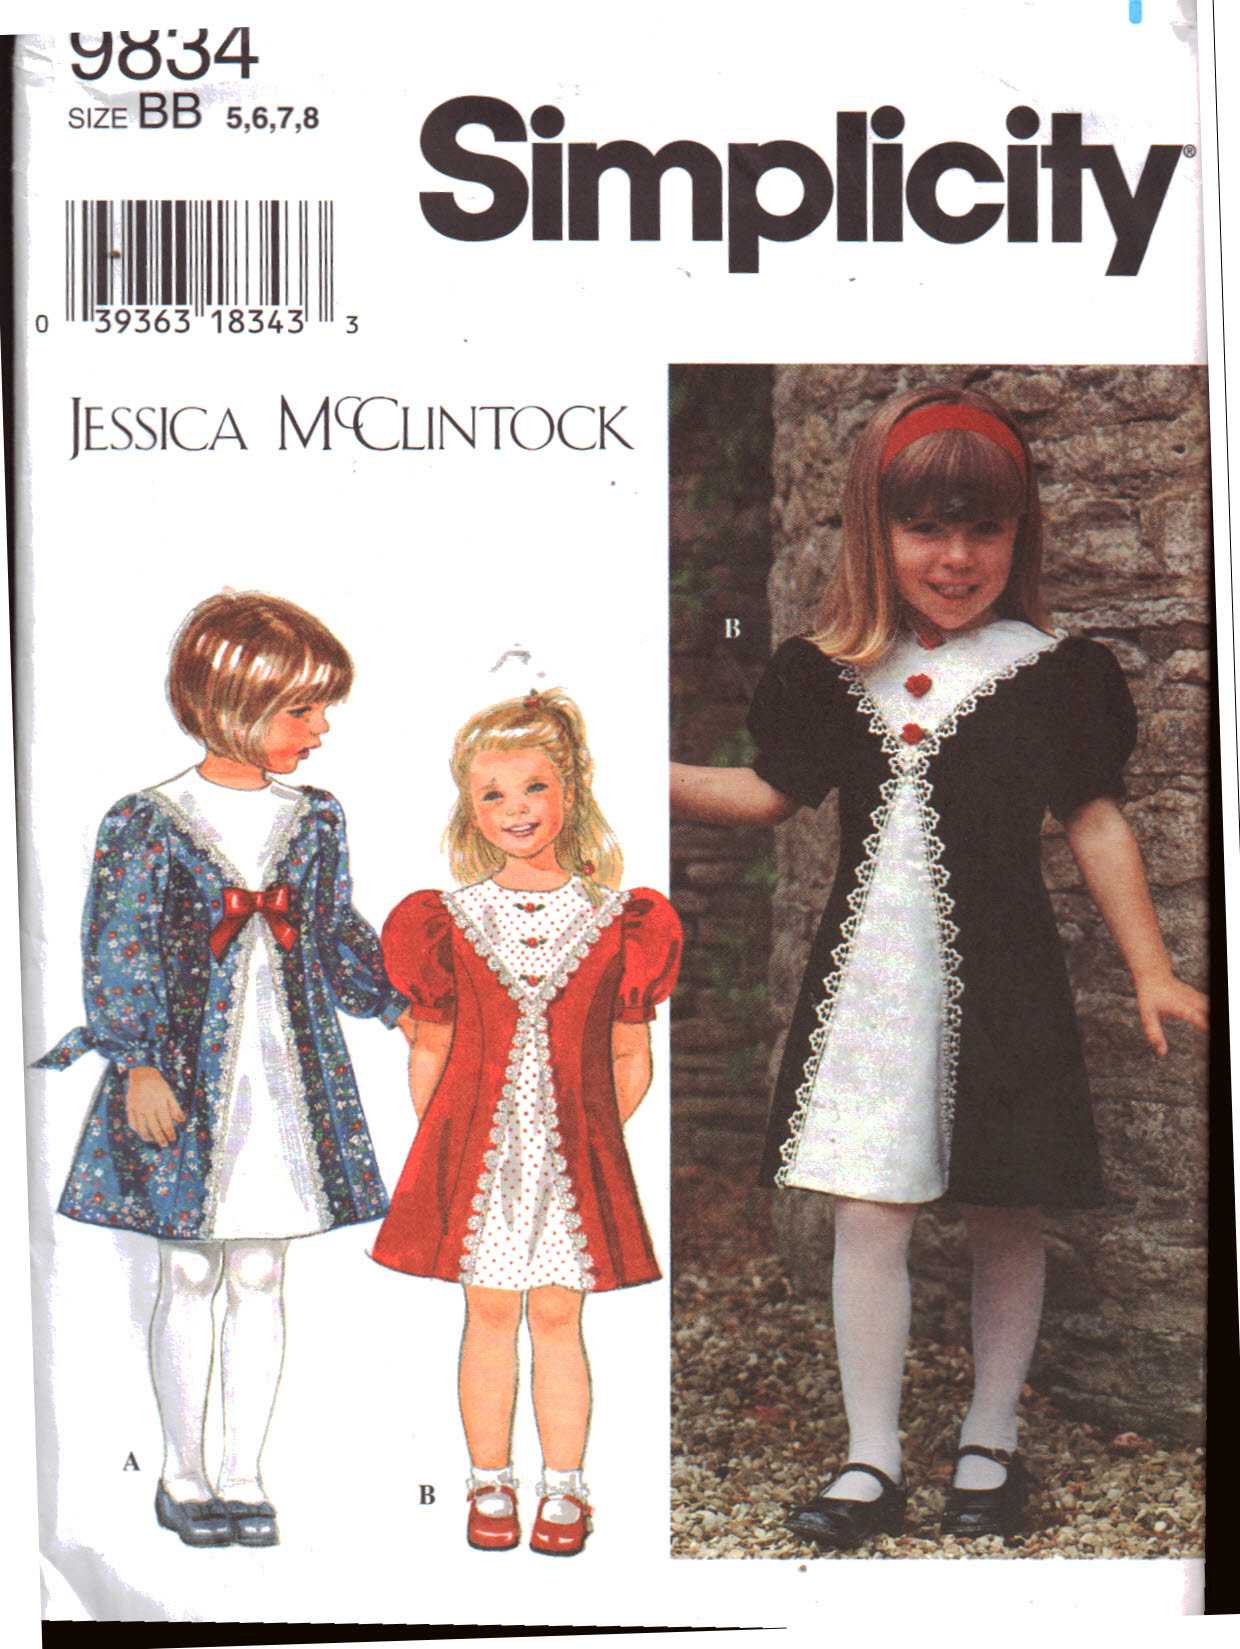 Simplicity 9834 Girl's Dress Size: BB 5-6-7-8 or AA 3-4-5-6 Uncut ...